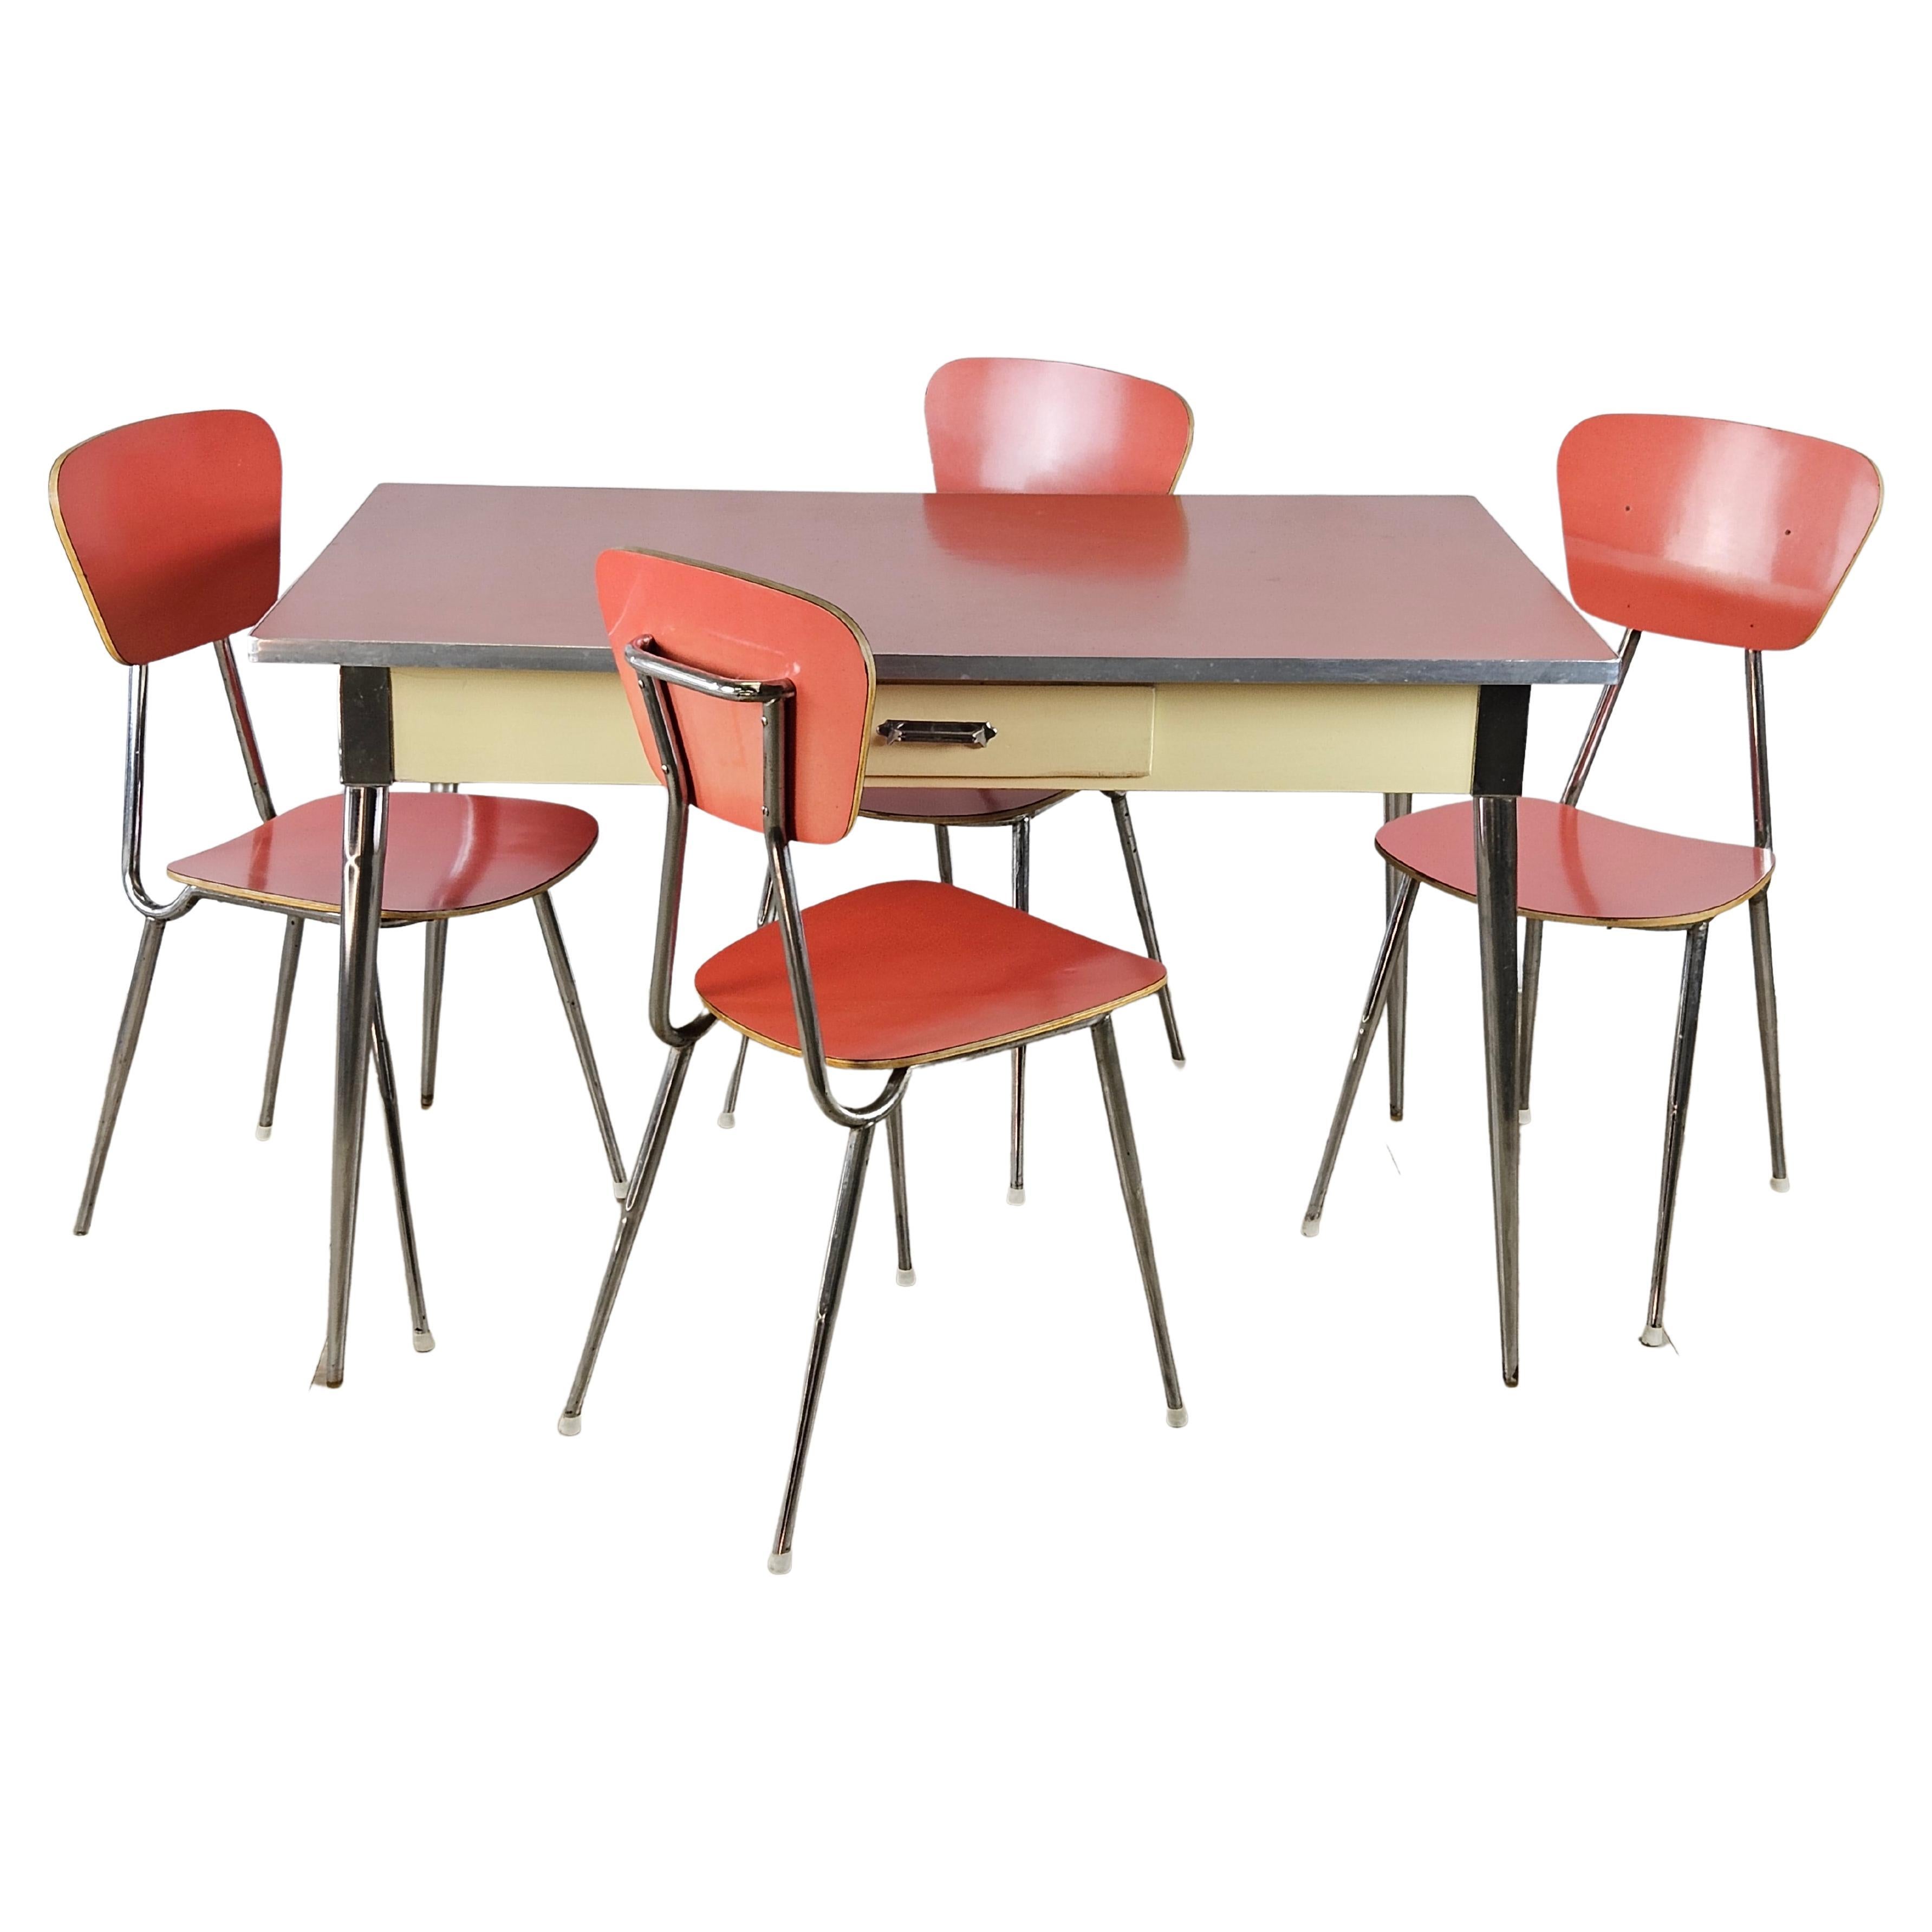 Dining set with red formica table and 4 chairs For Sale